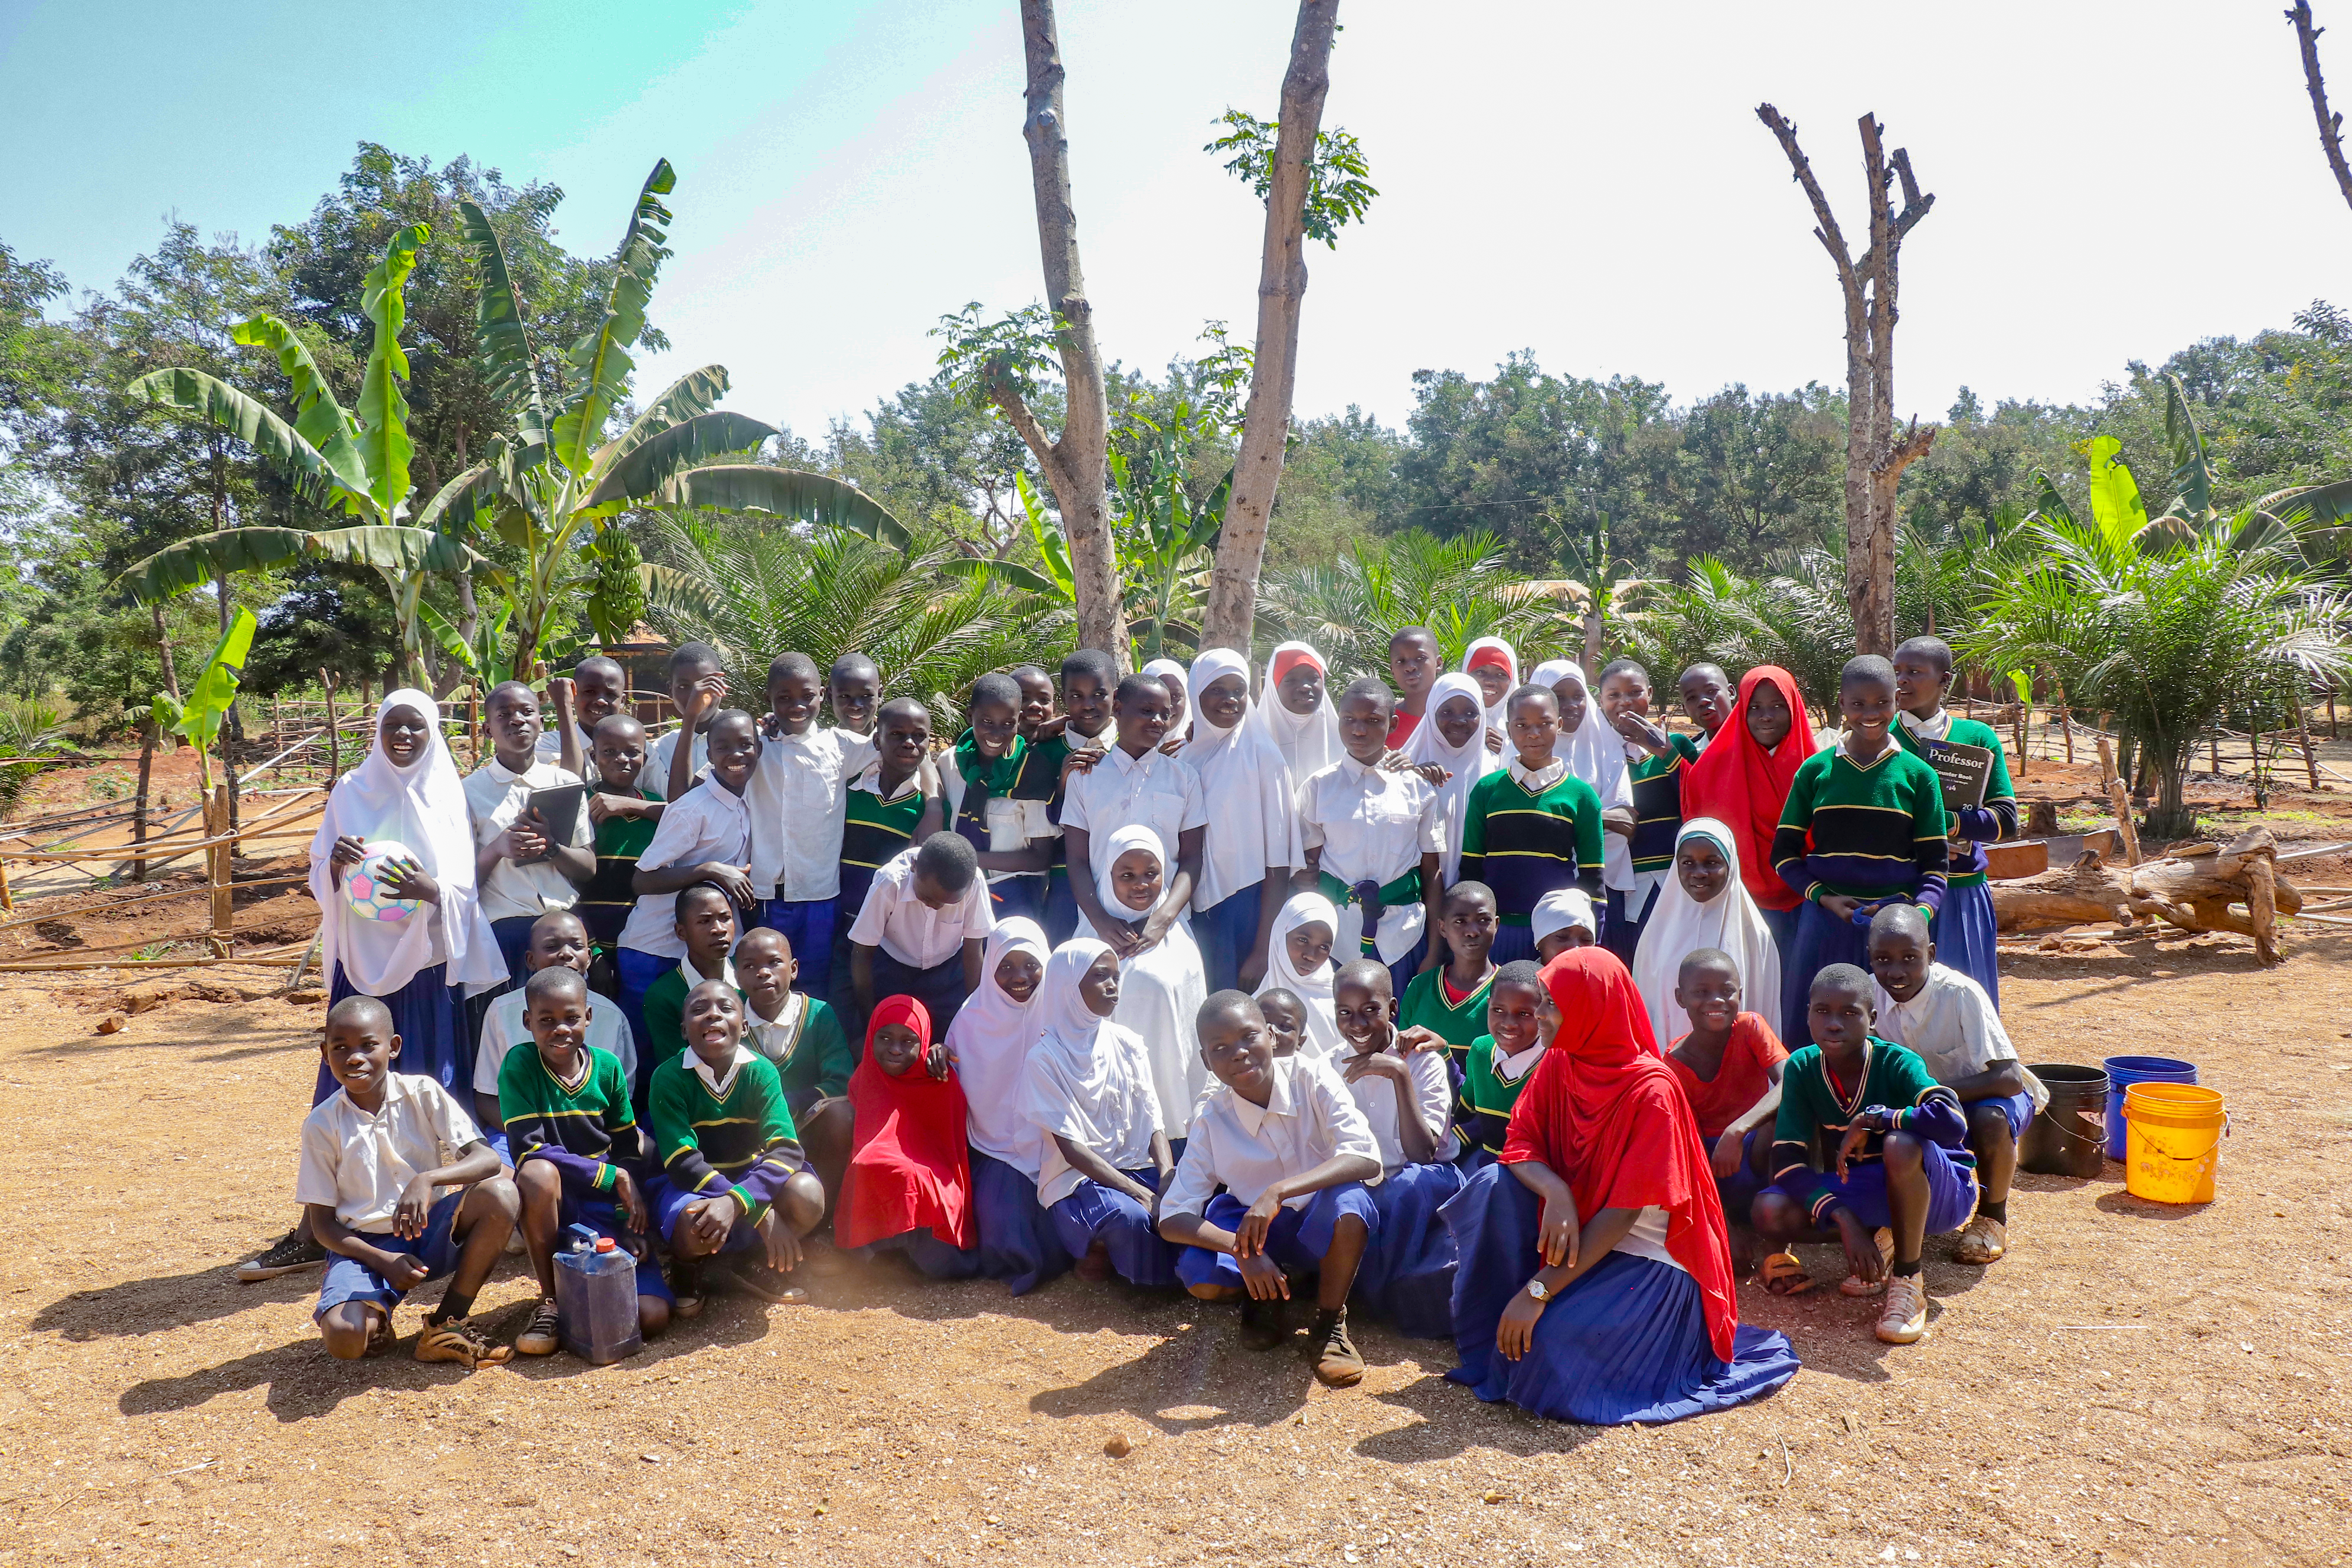 IMA World Health advances population, health and environmental education with youth through the MOMENTUM Integrated Health Resilience project in Tanzania.